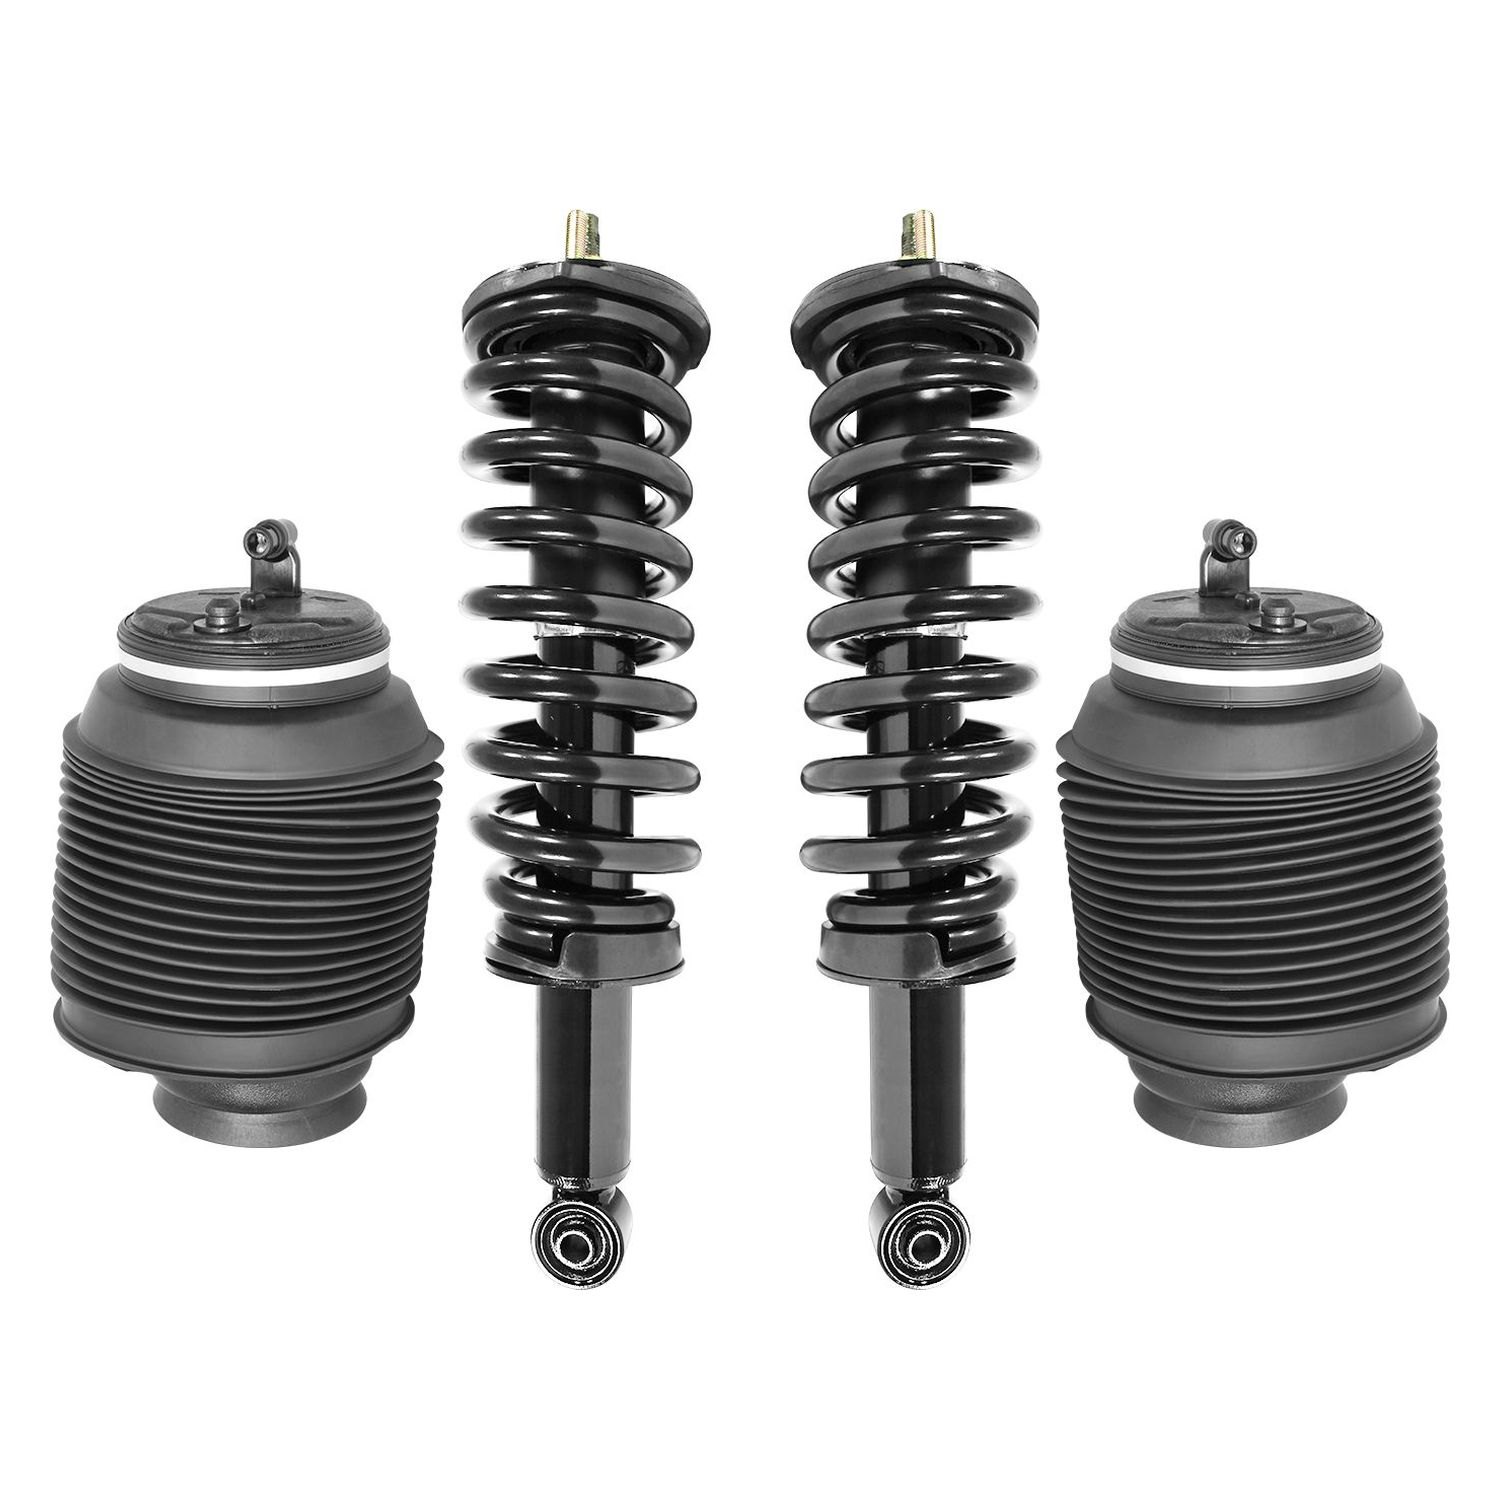 Air to coil springs on a 2005 Toyota Sequoia | Toyota Nation Forum 2005 Toyota Sequoia Rear Spring Conversion Kit